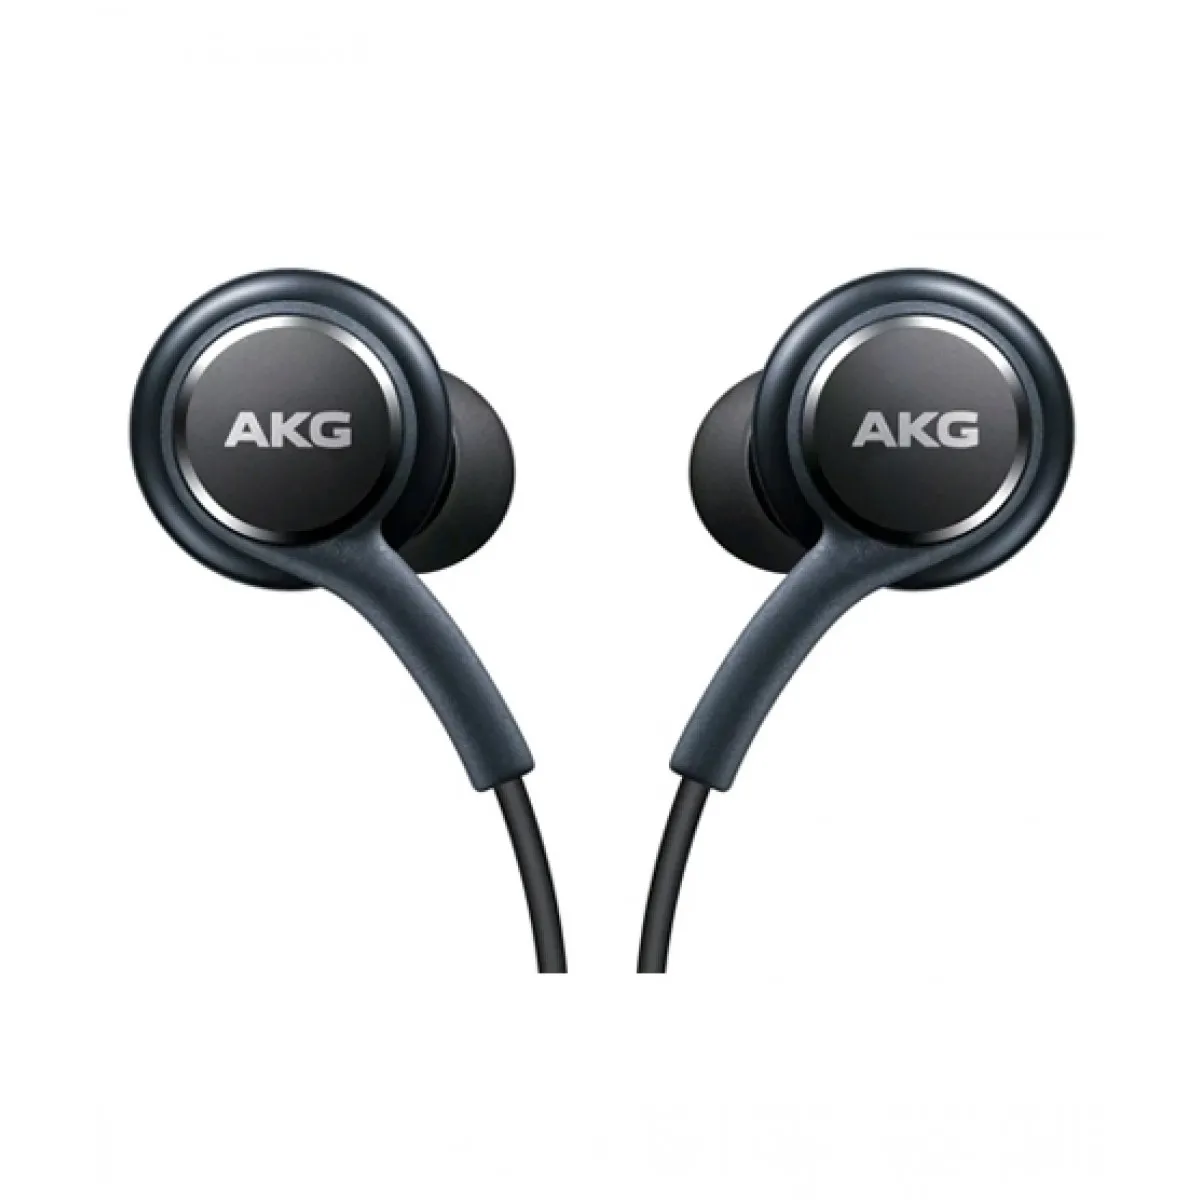 Grey and black Samsung earbuds tuned by AKG